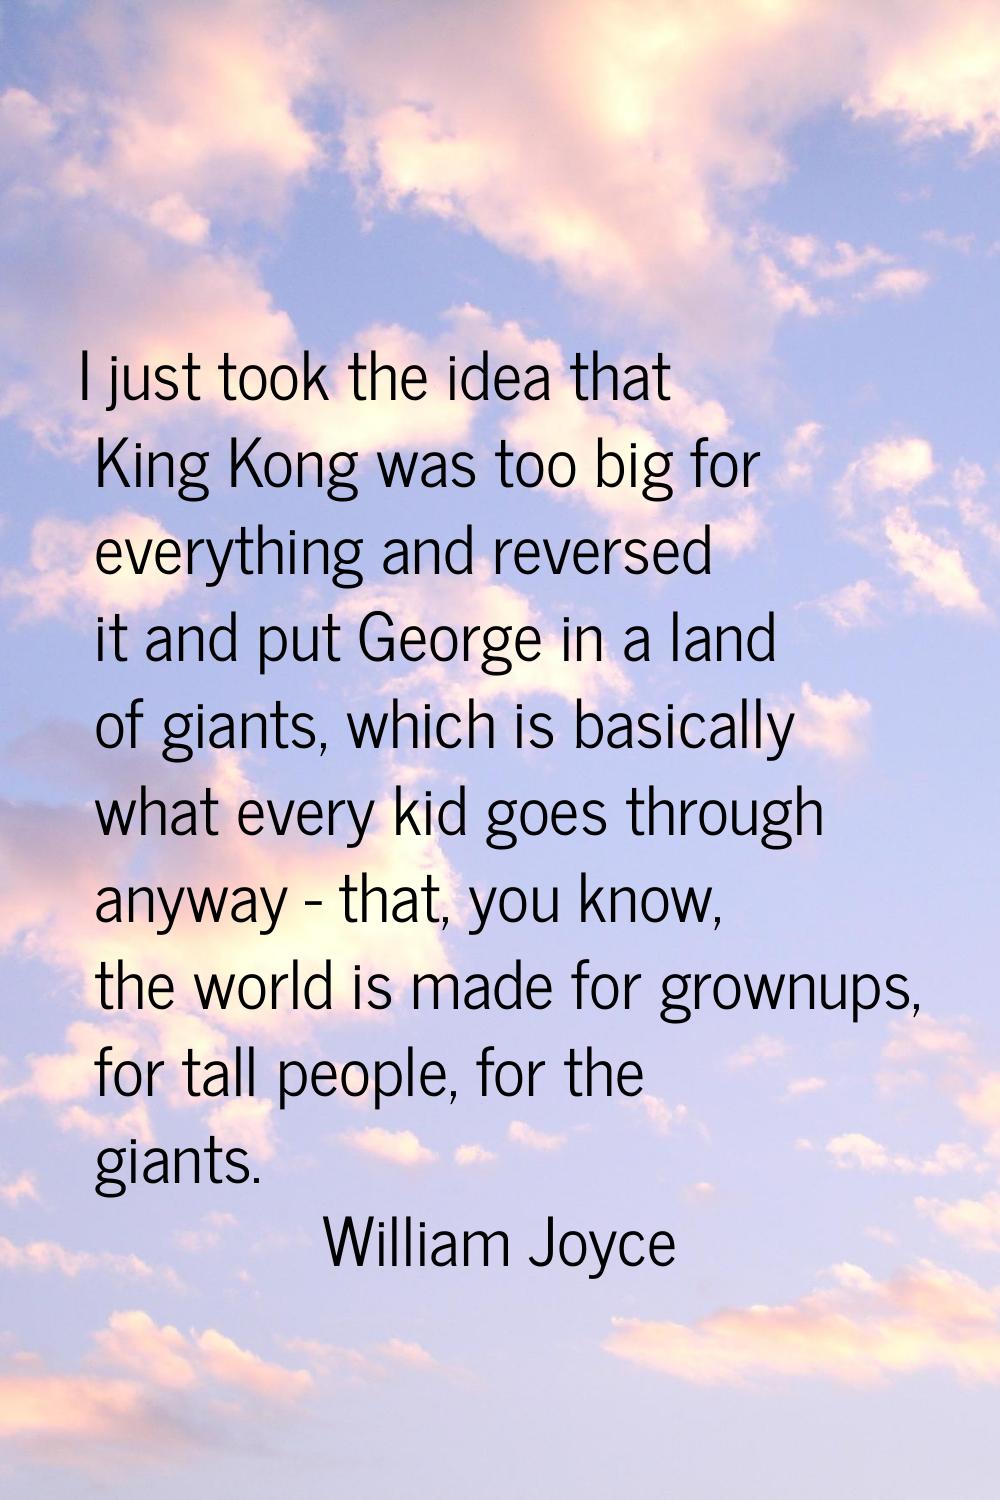 I just took the idea that King Kong was too big for everything and reversed it and put George in a 